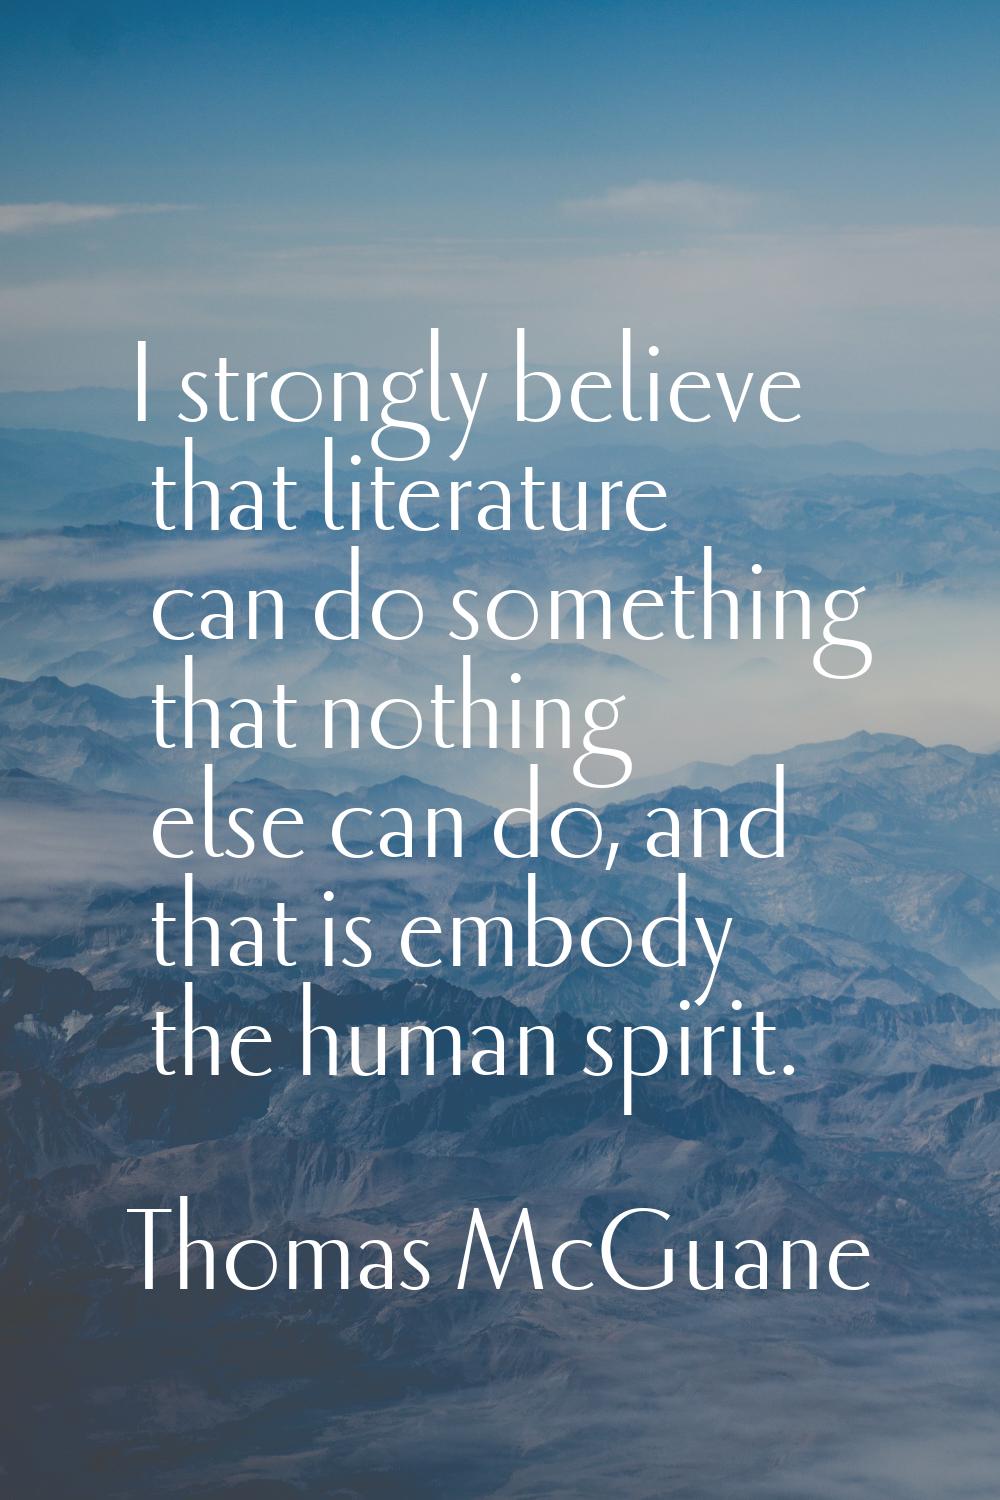 I strongly believe that literature can do something that nothing else can do, and that is embody th